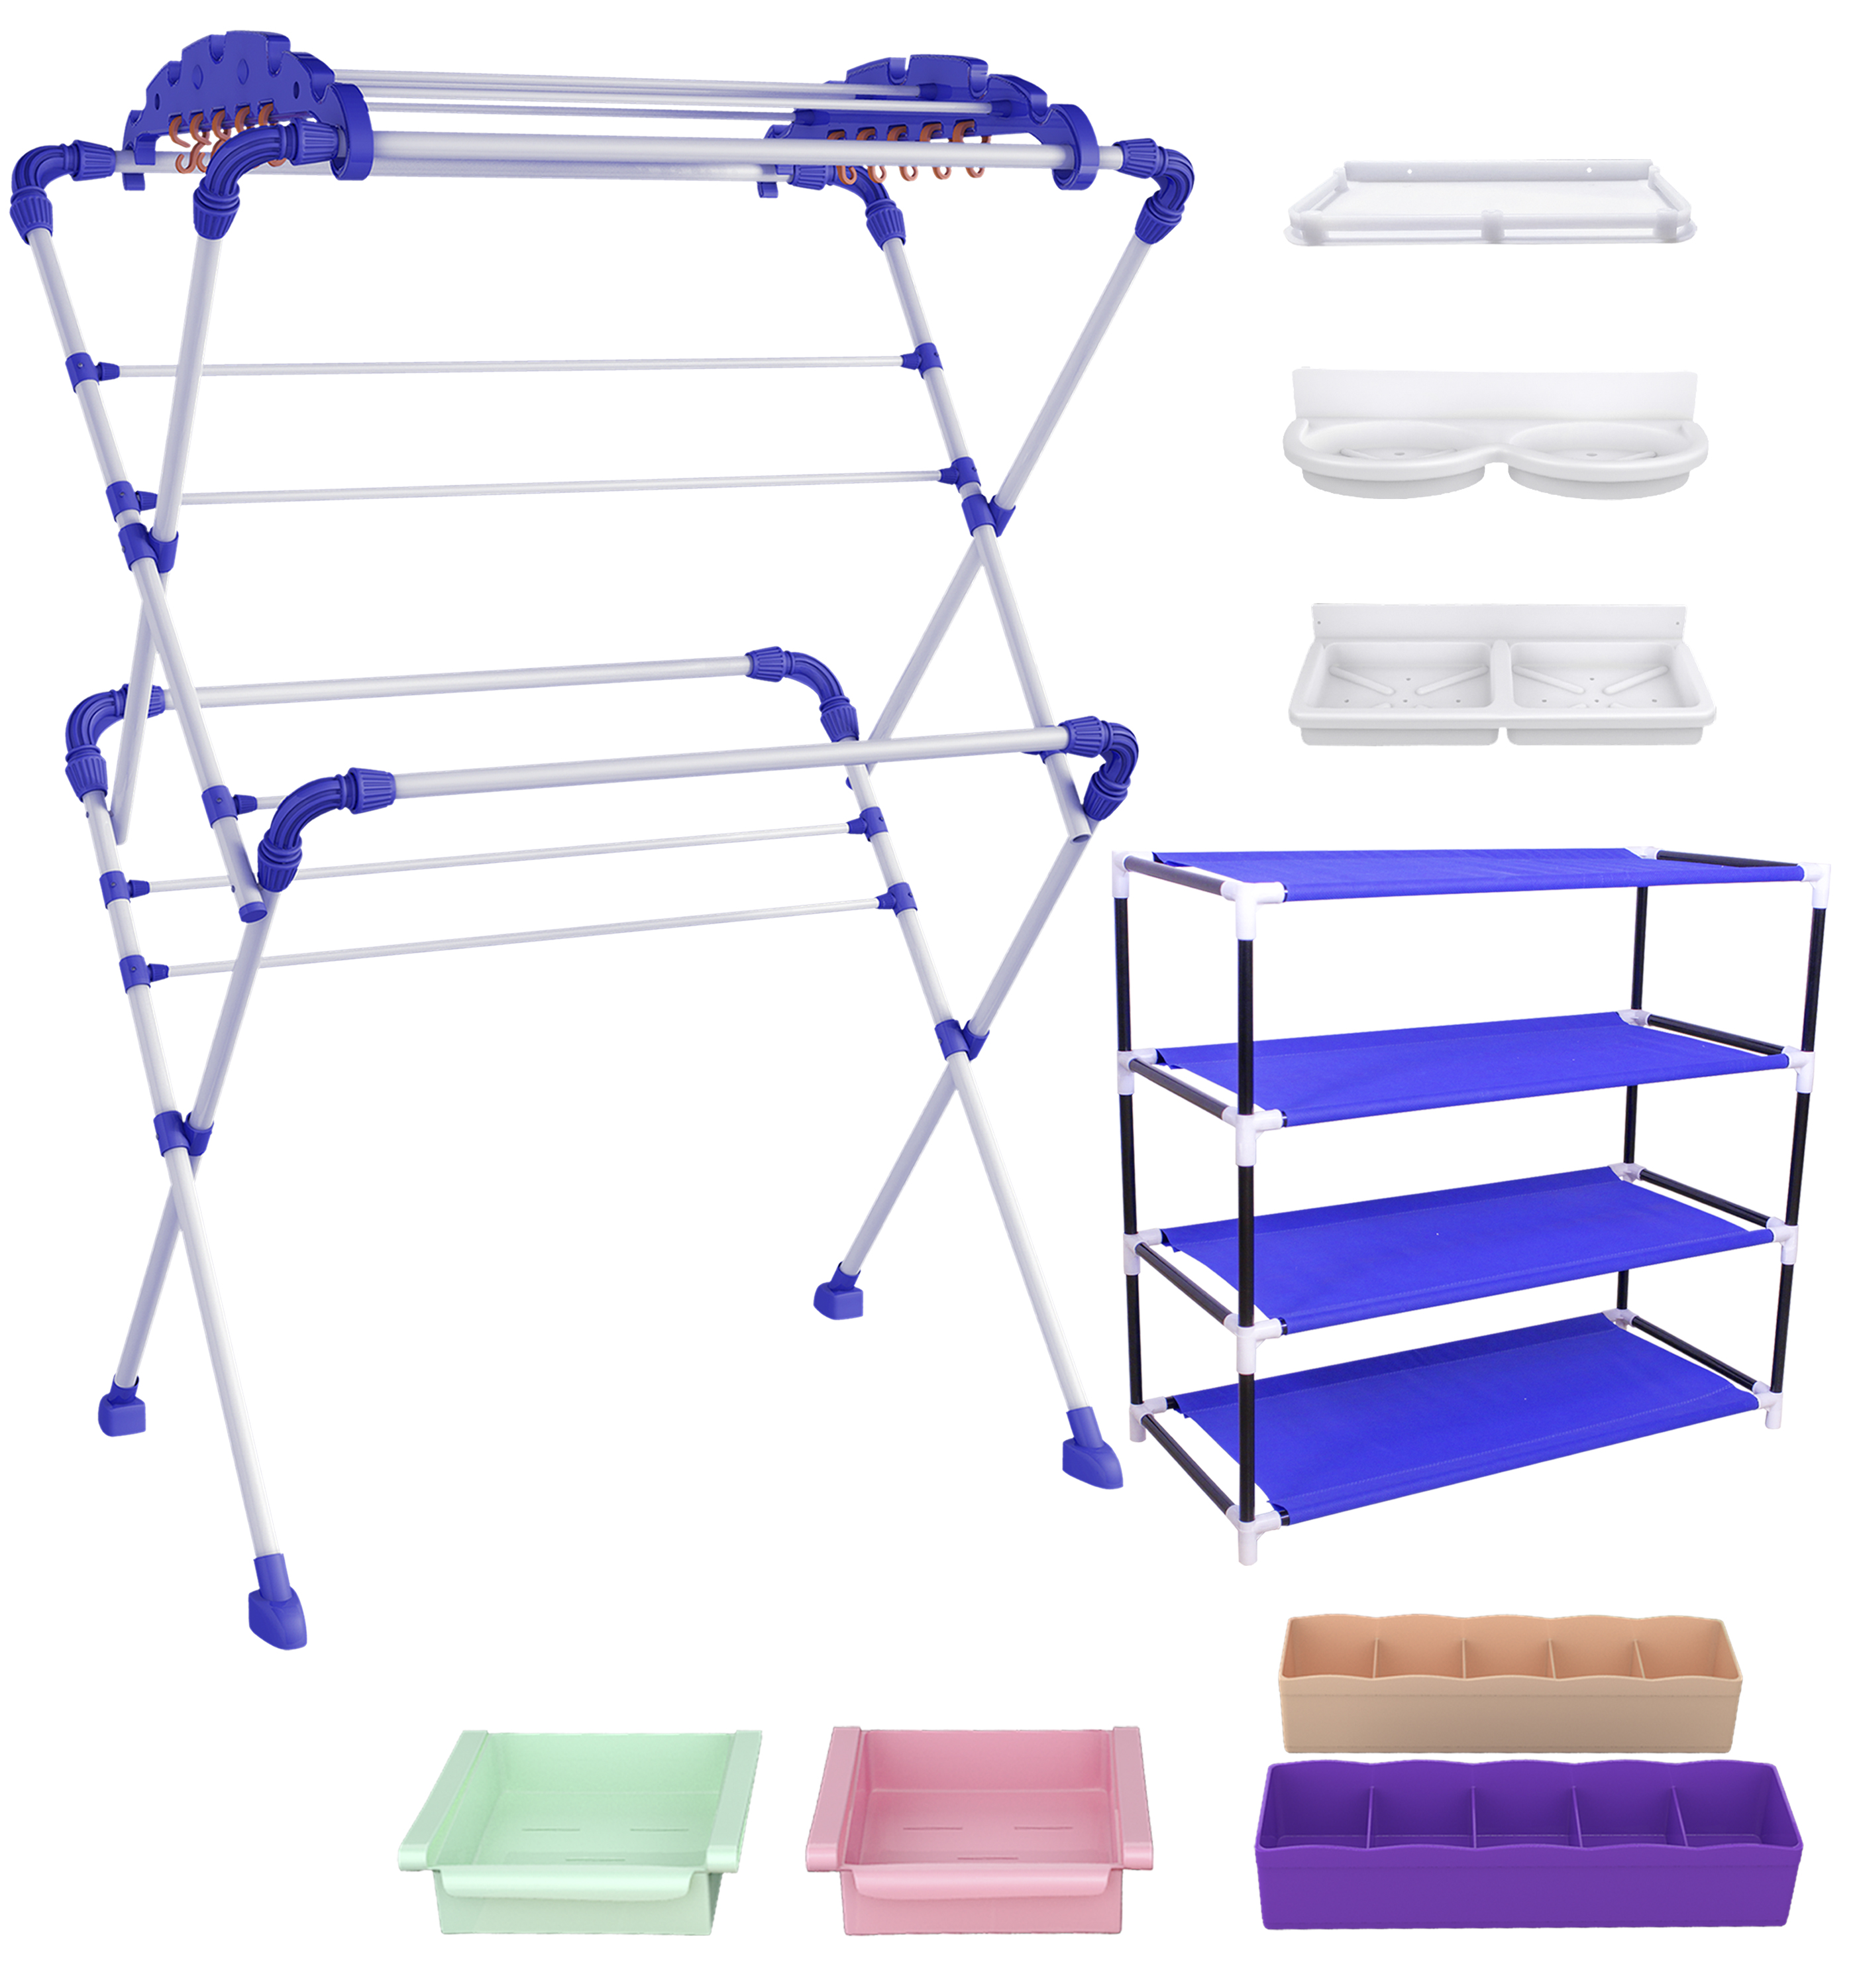 TRENDY Sumo Cloth Drying Stand Combo